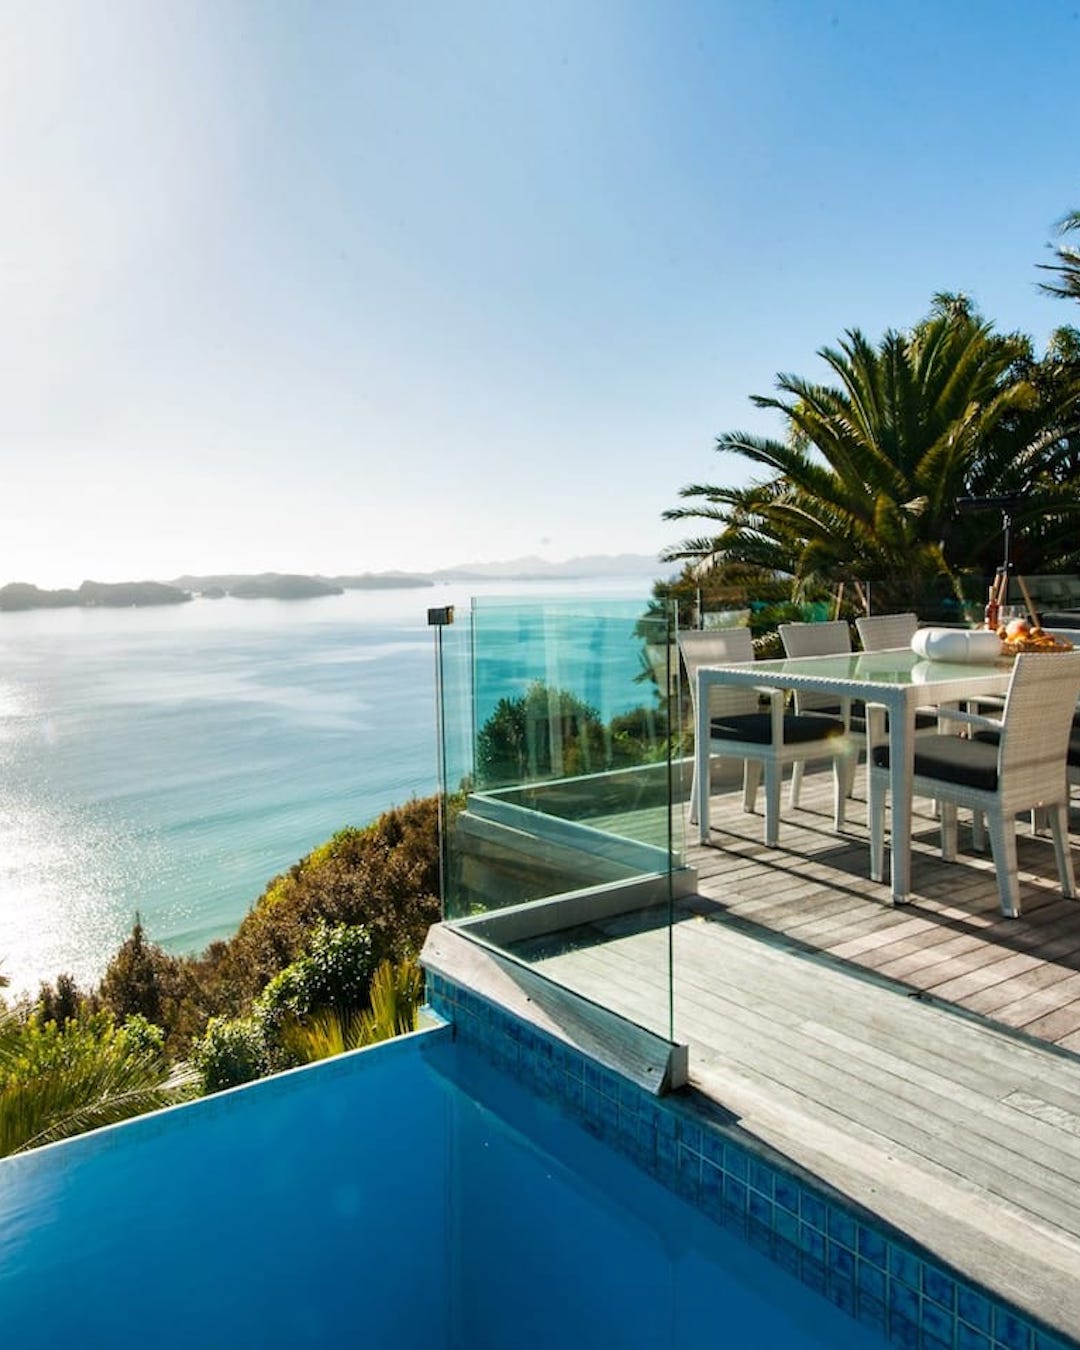 An incredible New Zealand Airbnb with a dip pool and deck overlooking a bay. Definitely one of the best airbnbs in NZ